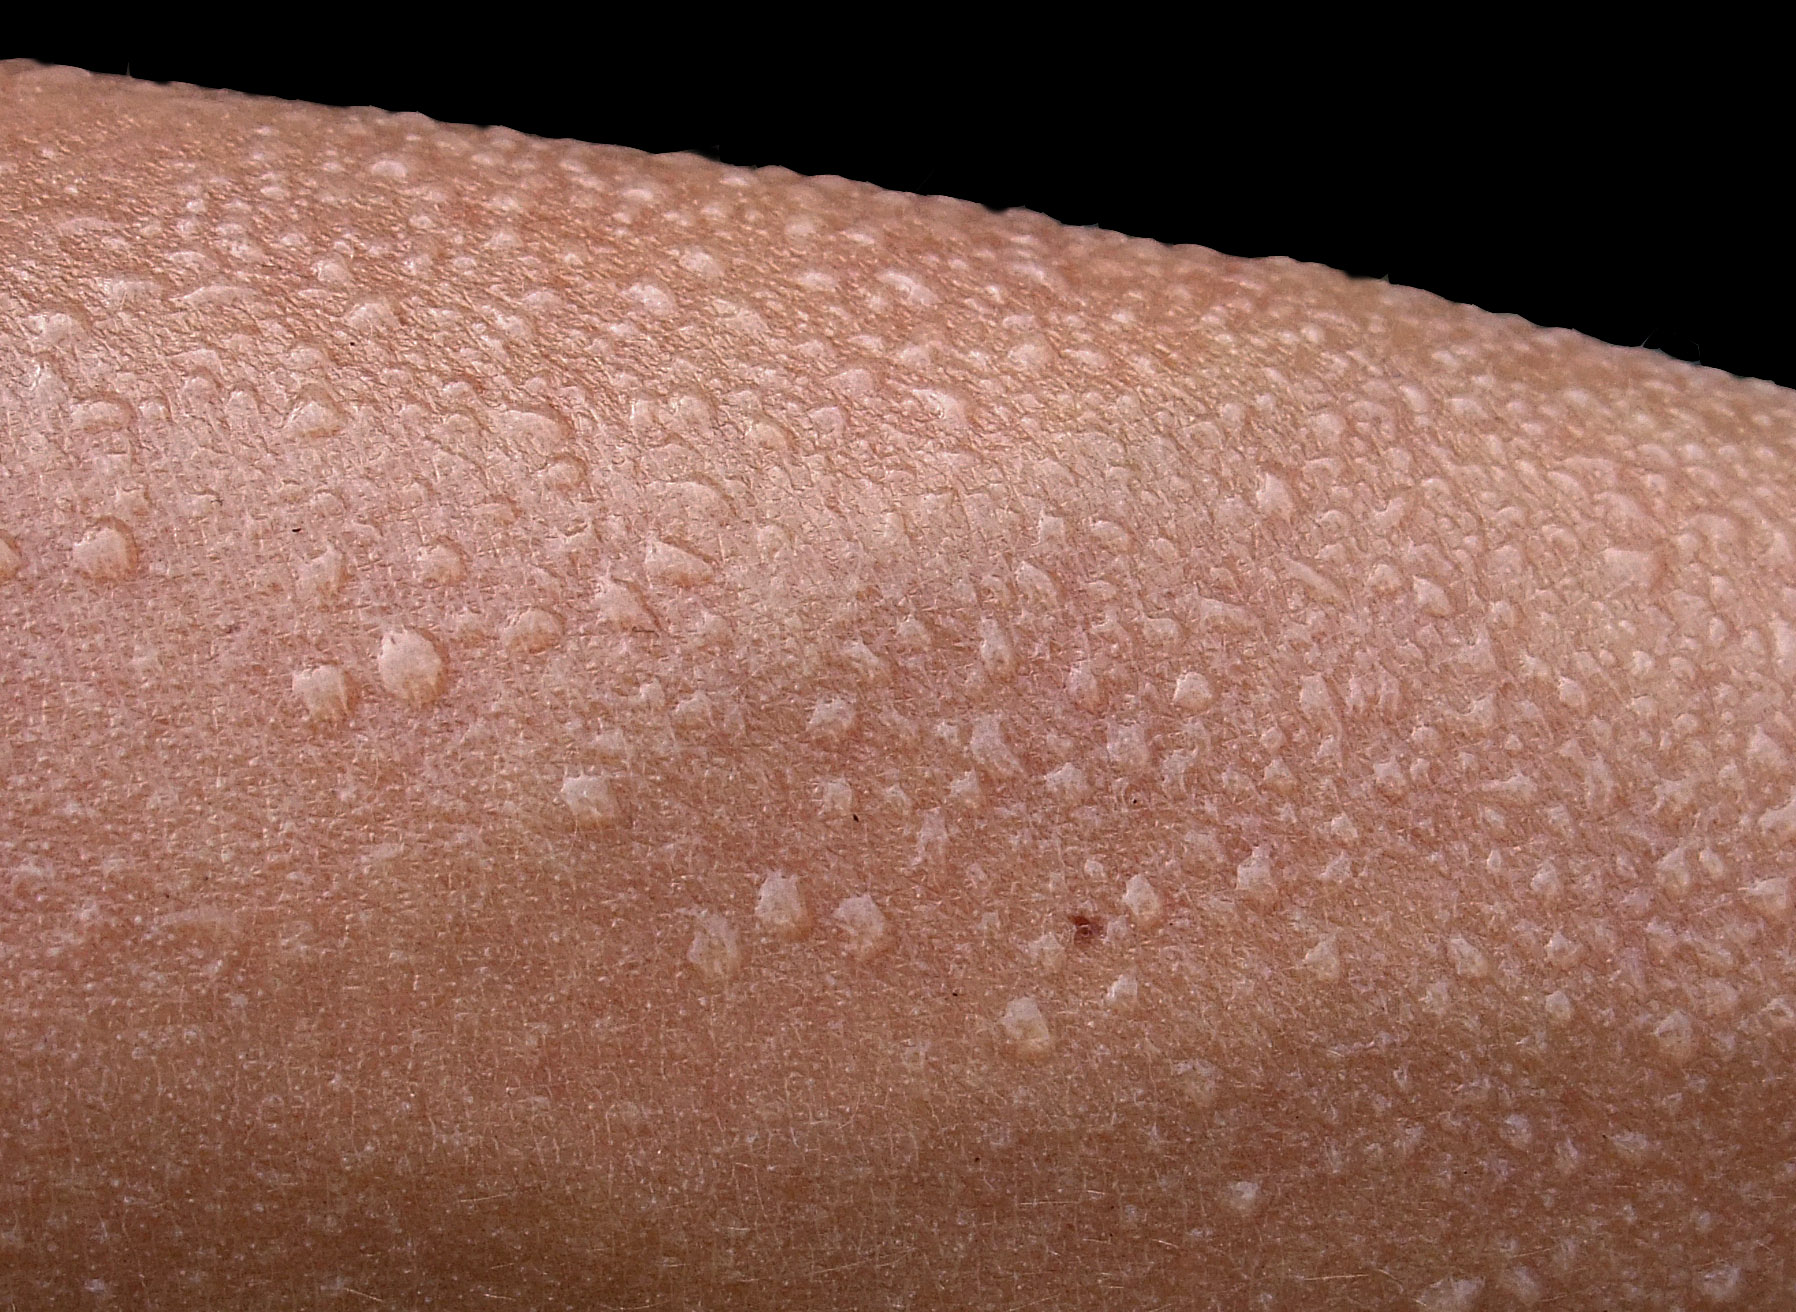 Up-close view of sweating skin